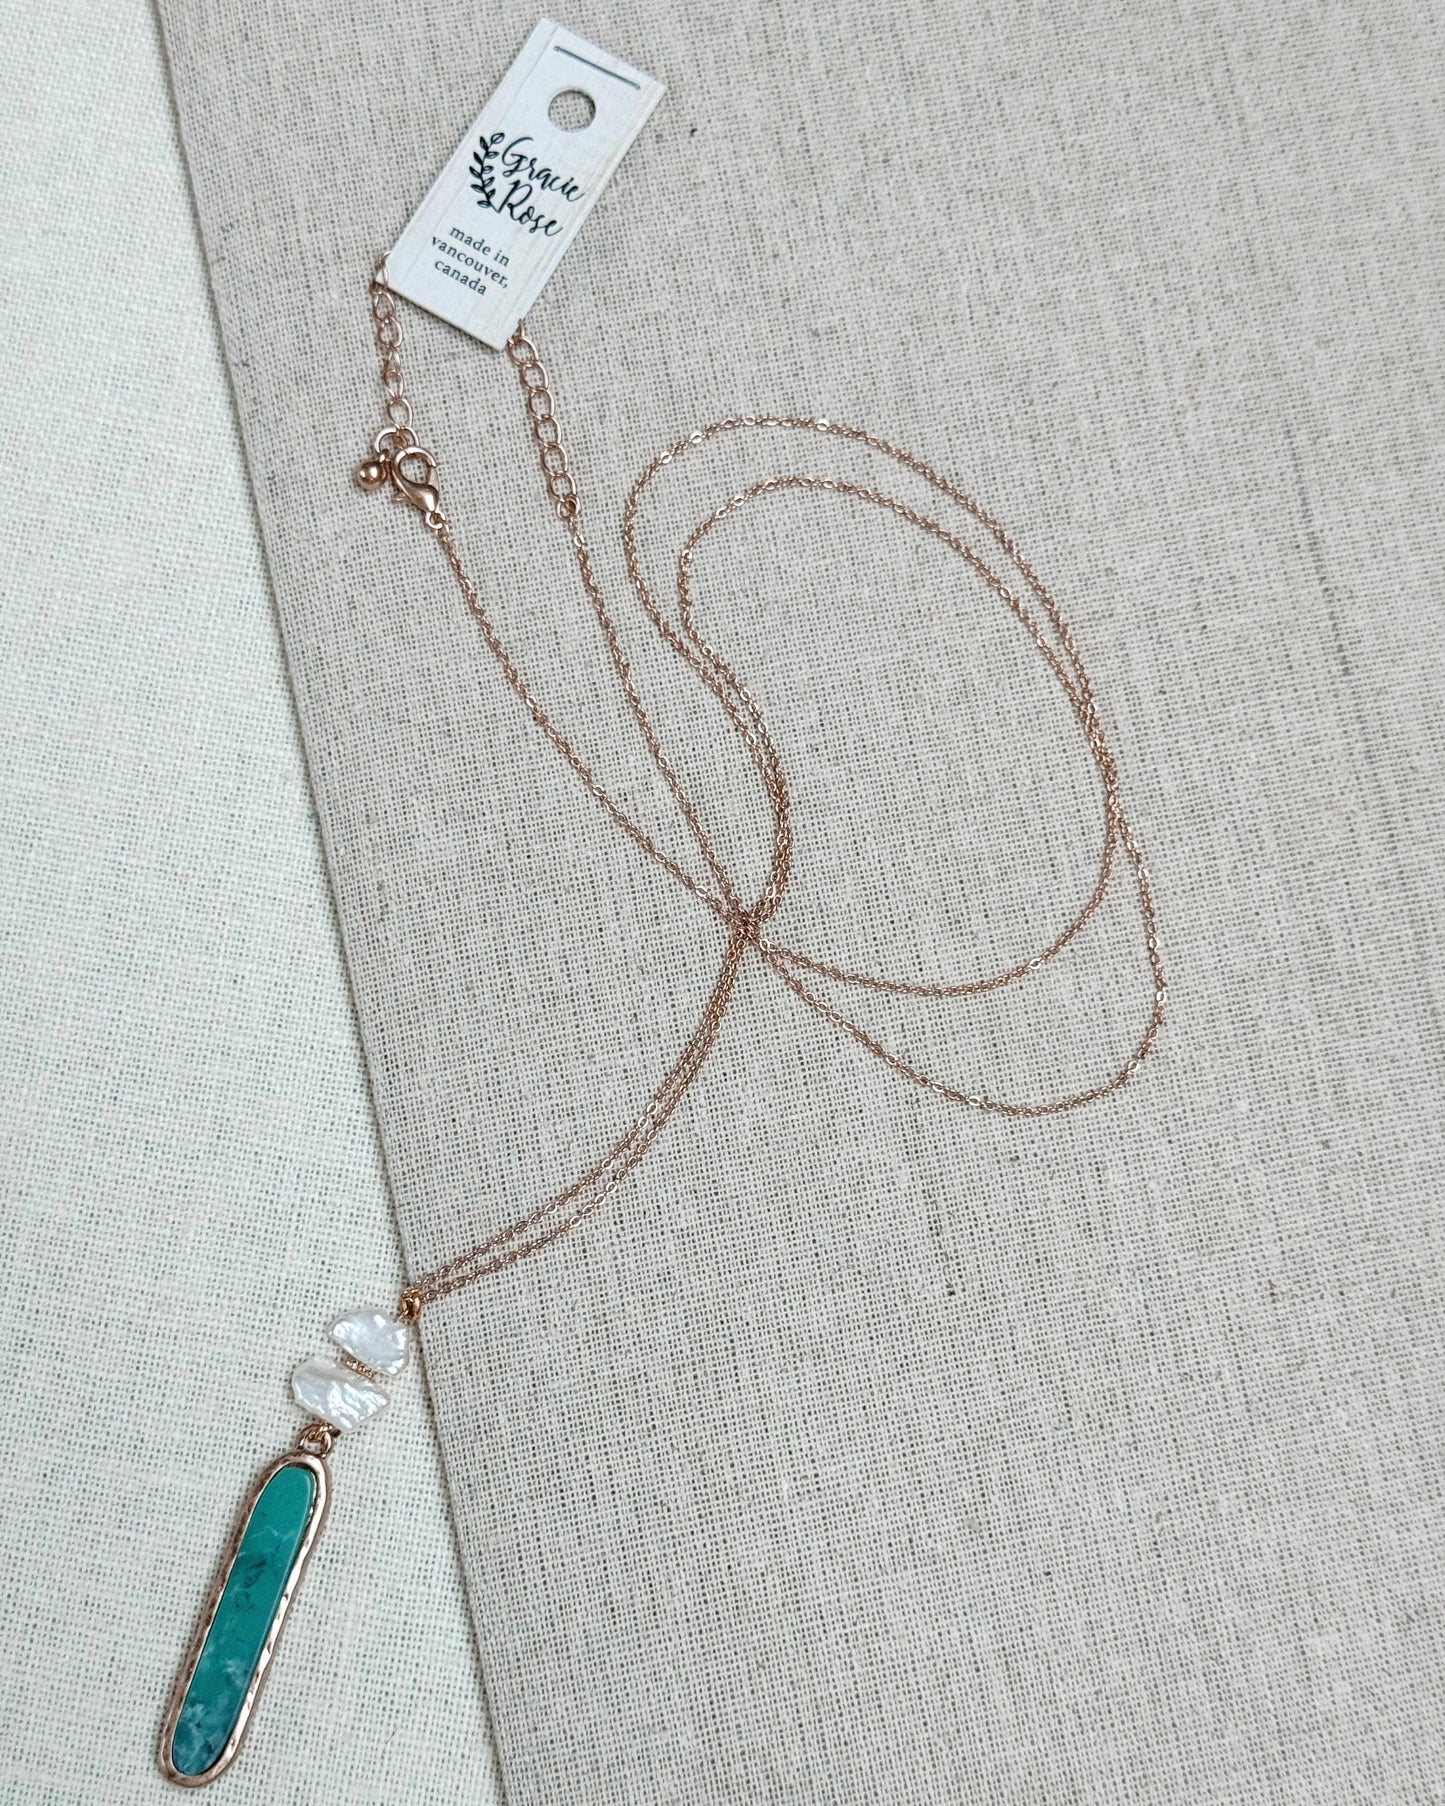 Gracie Rose Designs - Gold Amazonite & Freshwater Pearl Pendant Necklace